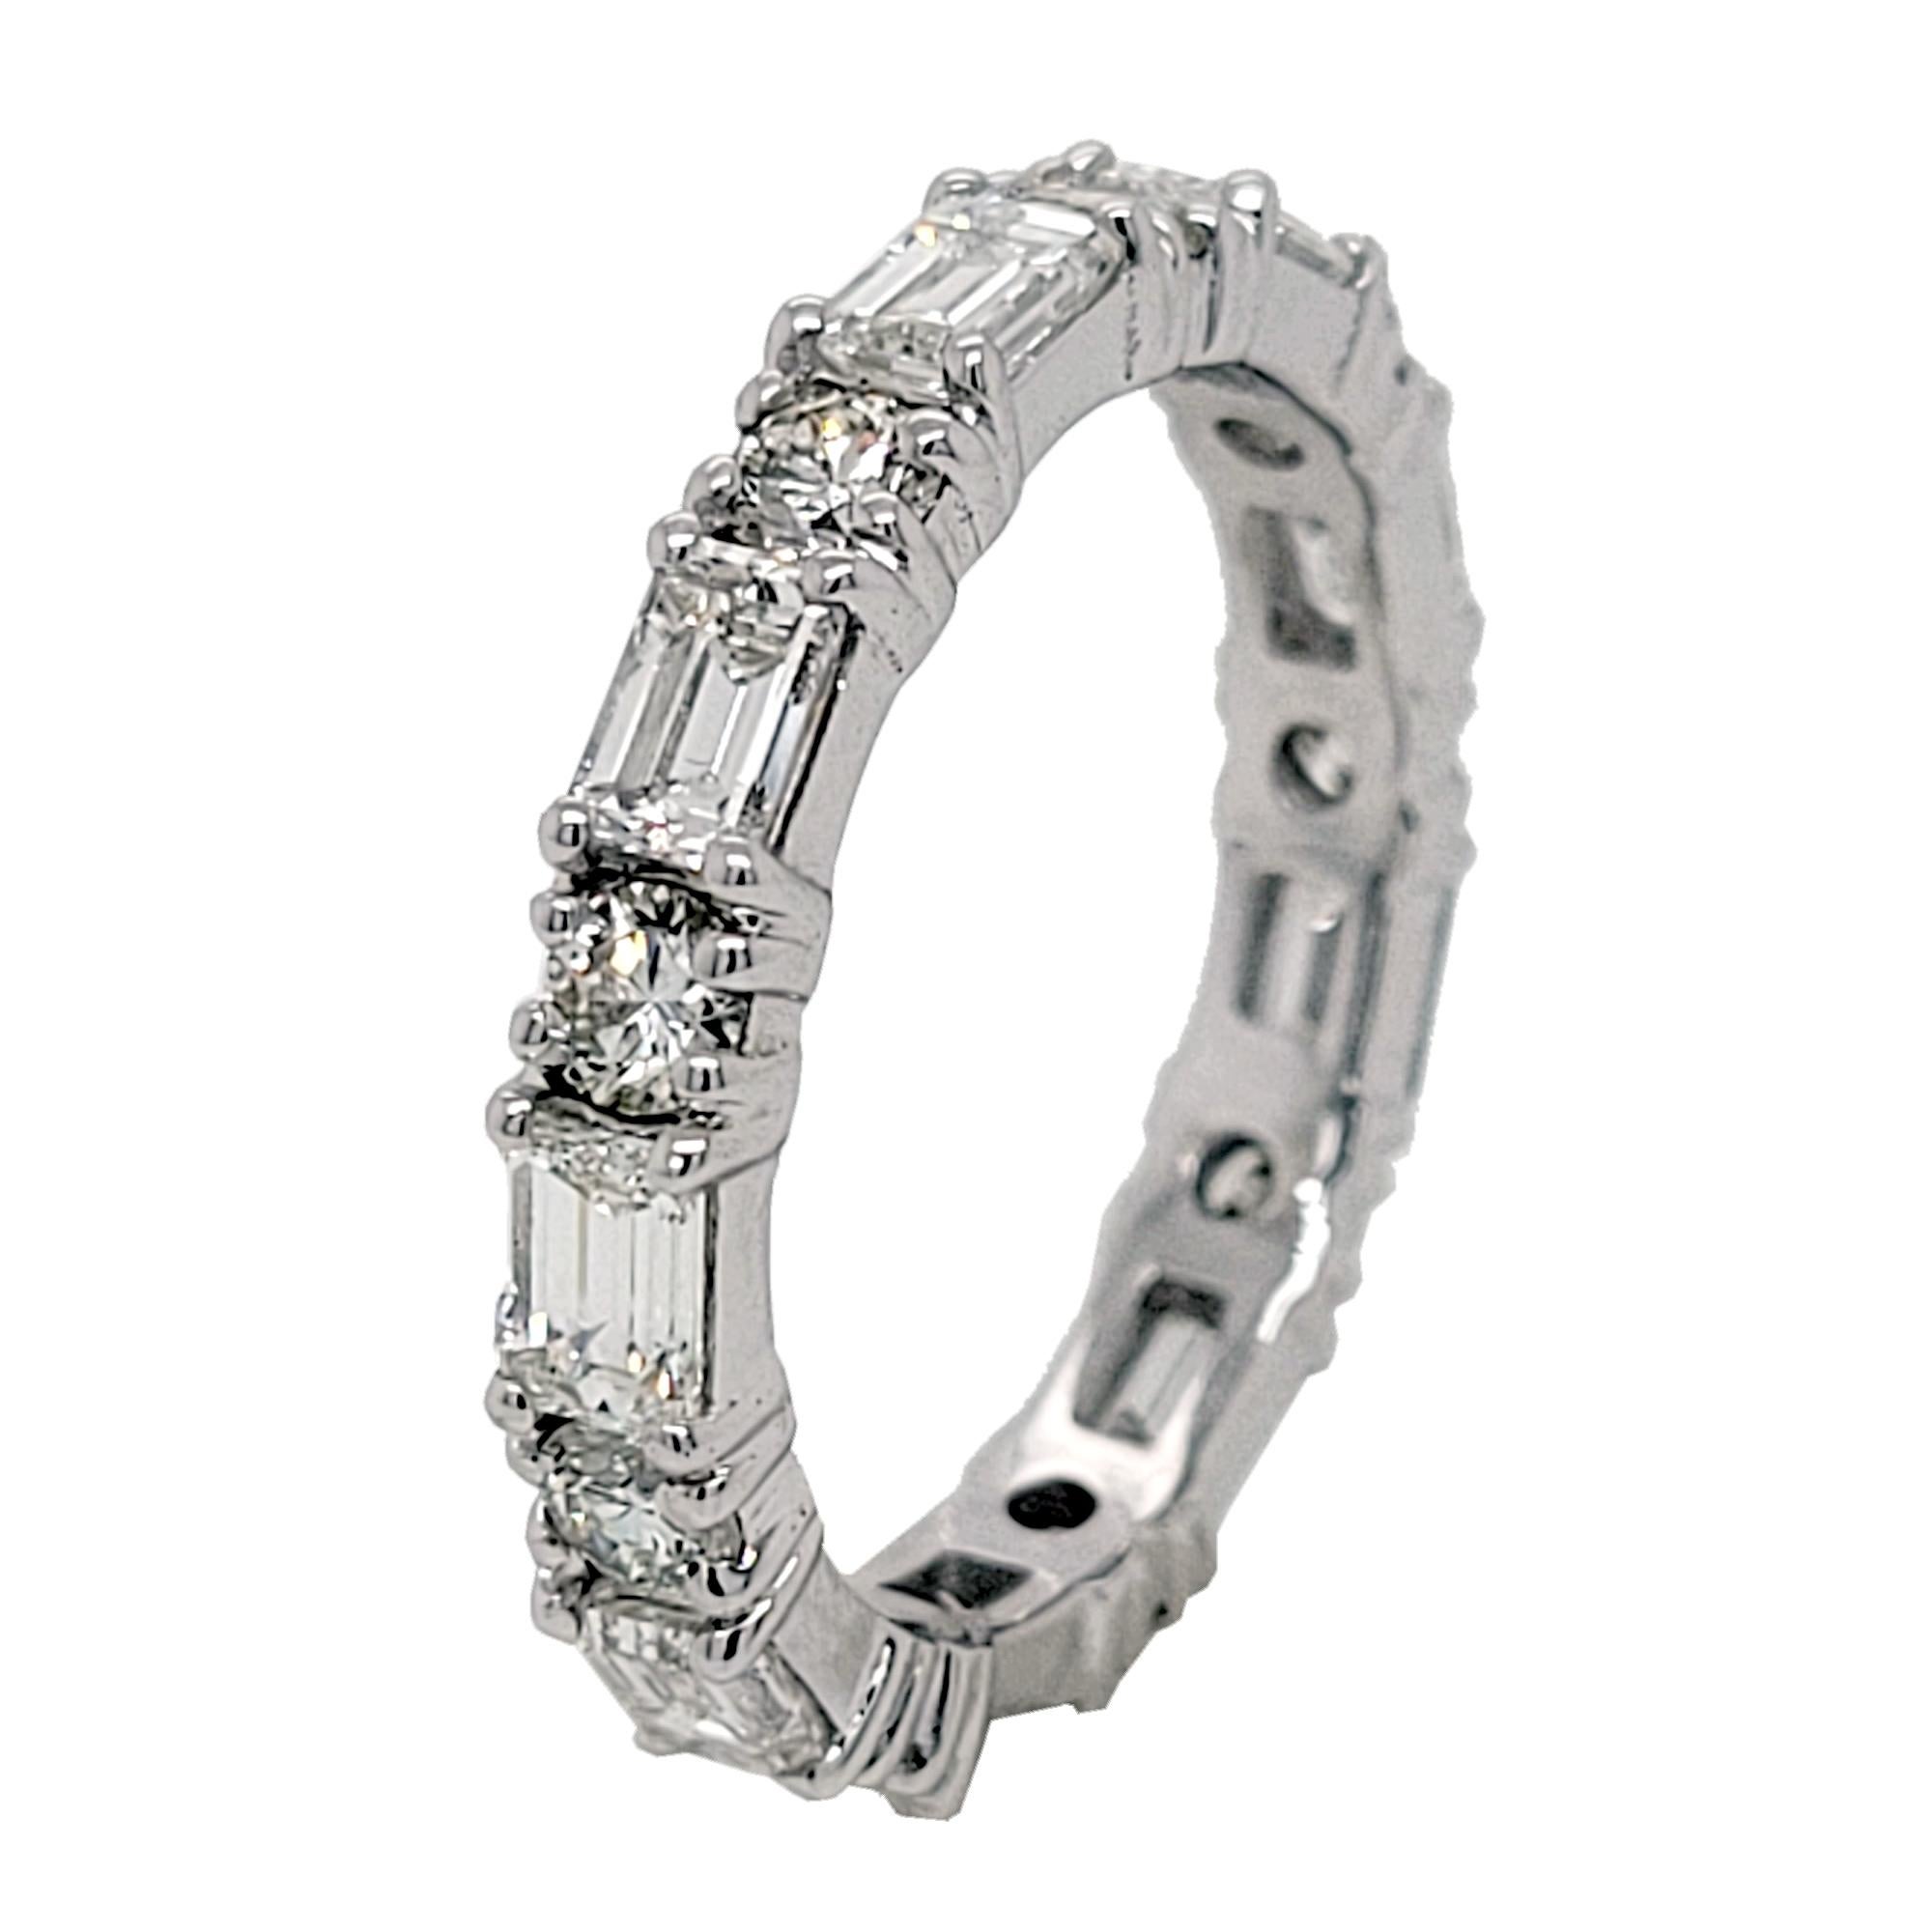 This beautiful Eternity Ring is made in 18K White Gold showcasing 9 perfectly matched VS/E-F Emerald Cut and 9 Round Brilliant Diamonds Set in Shared Prong Mode.
Total Weight of diamonds: 2.45 Ct Clarity: VS, Color: E-F
Total Weight of the Ring: 3.3